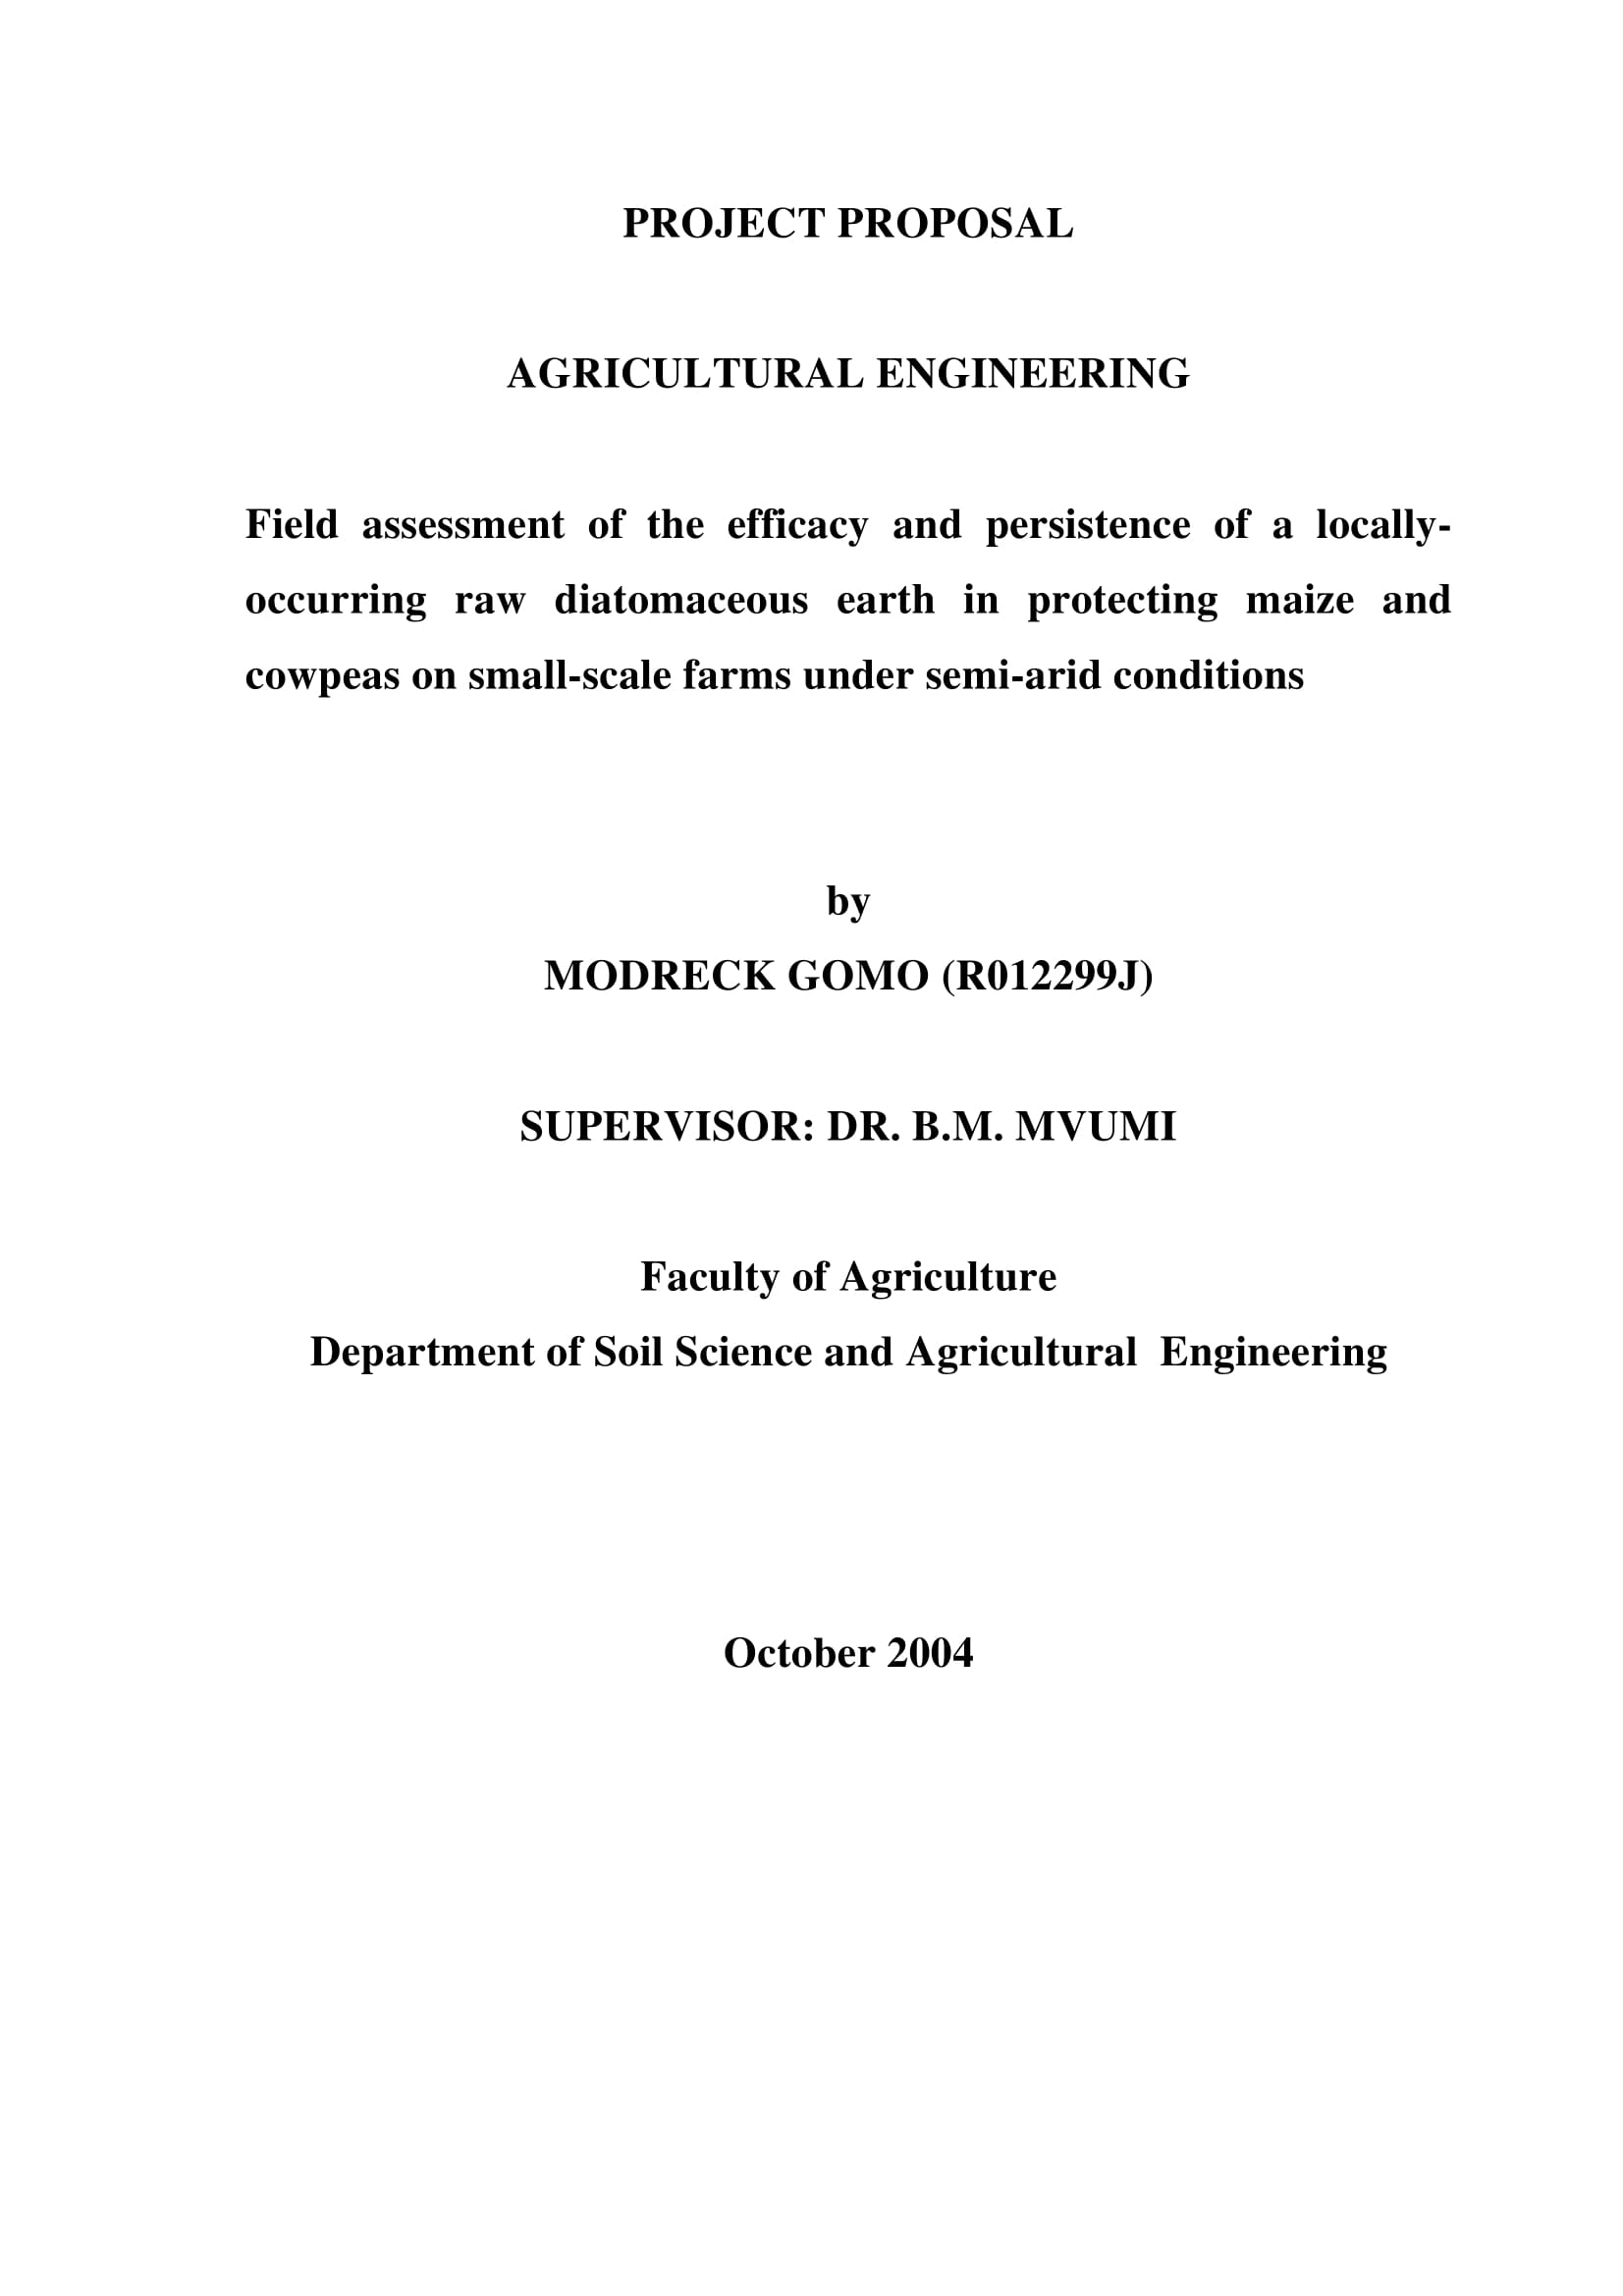 agricultural engineering project proposal example 01